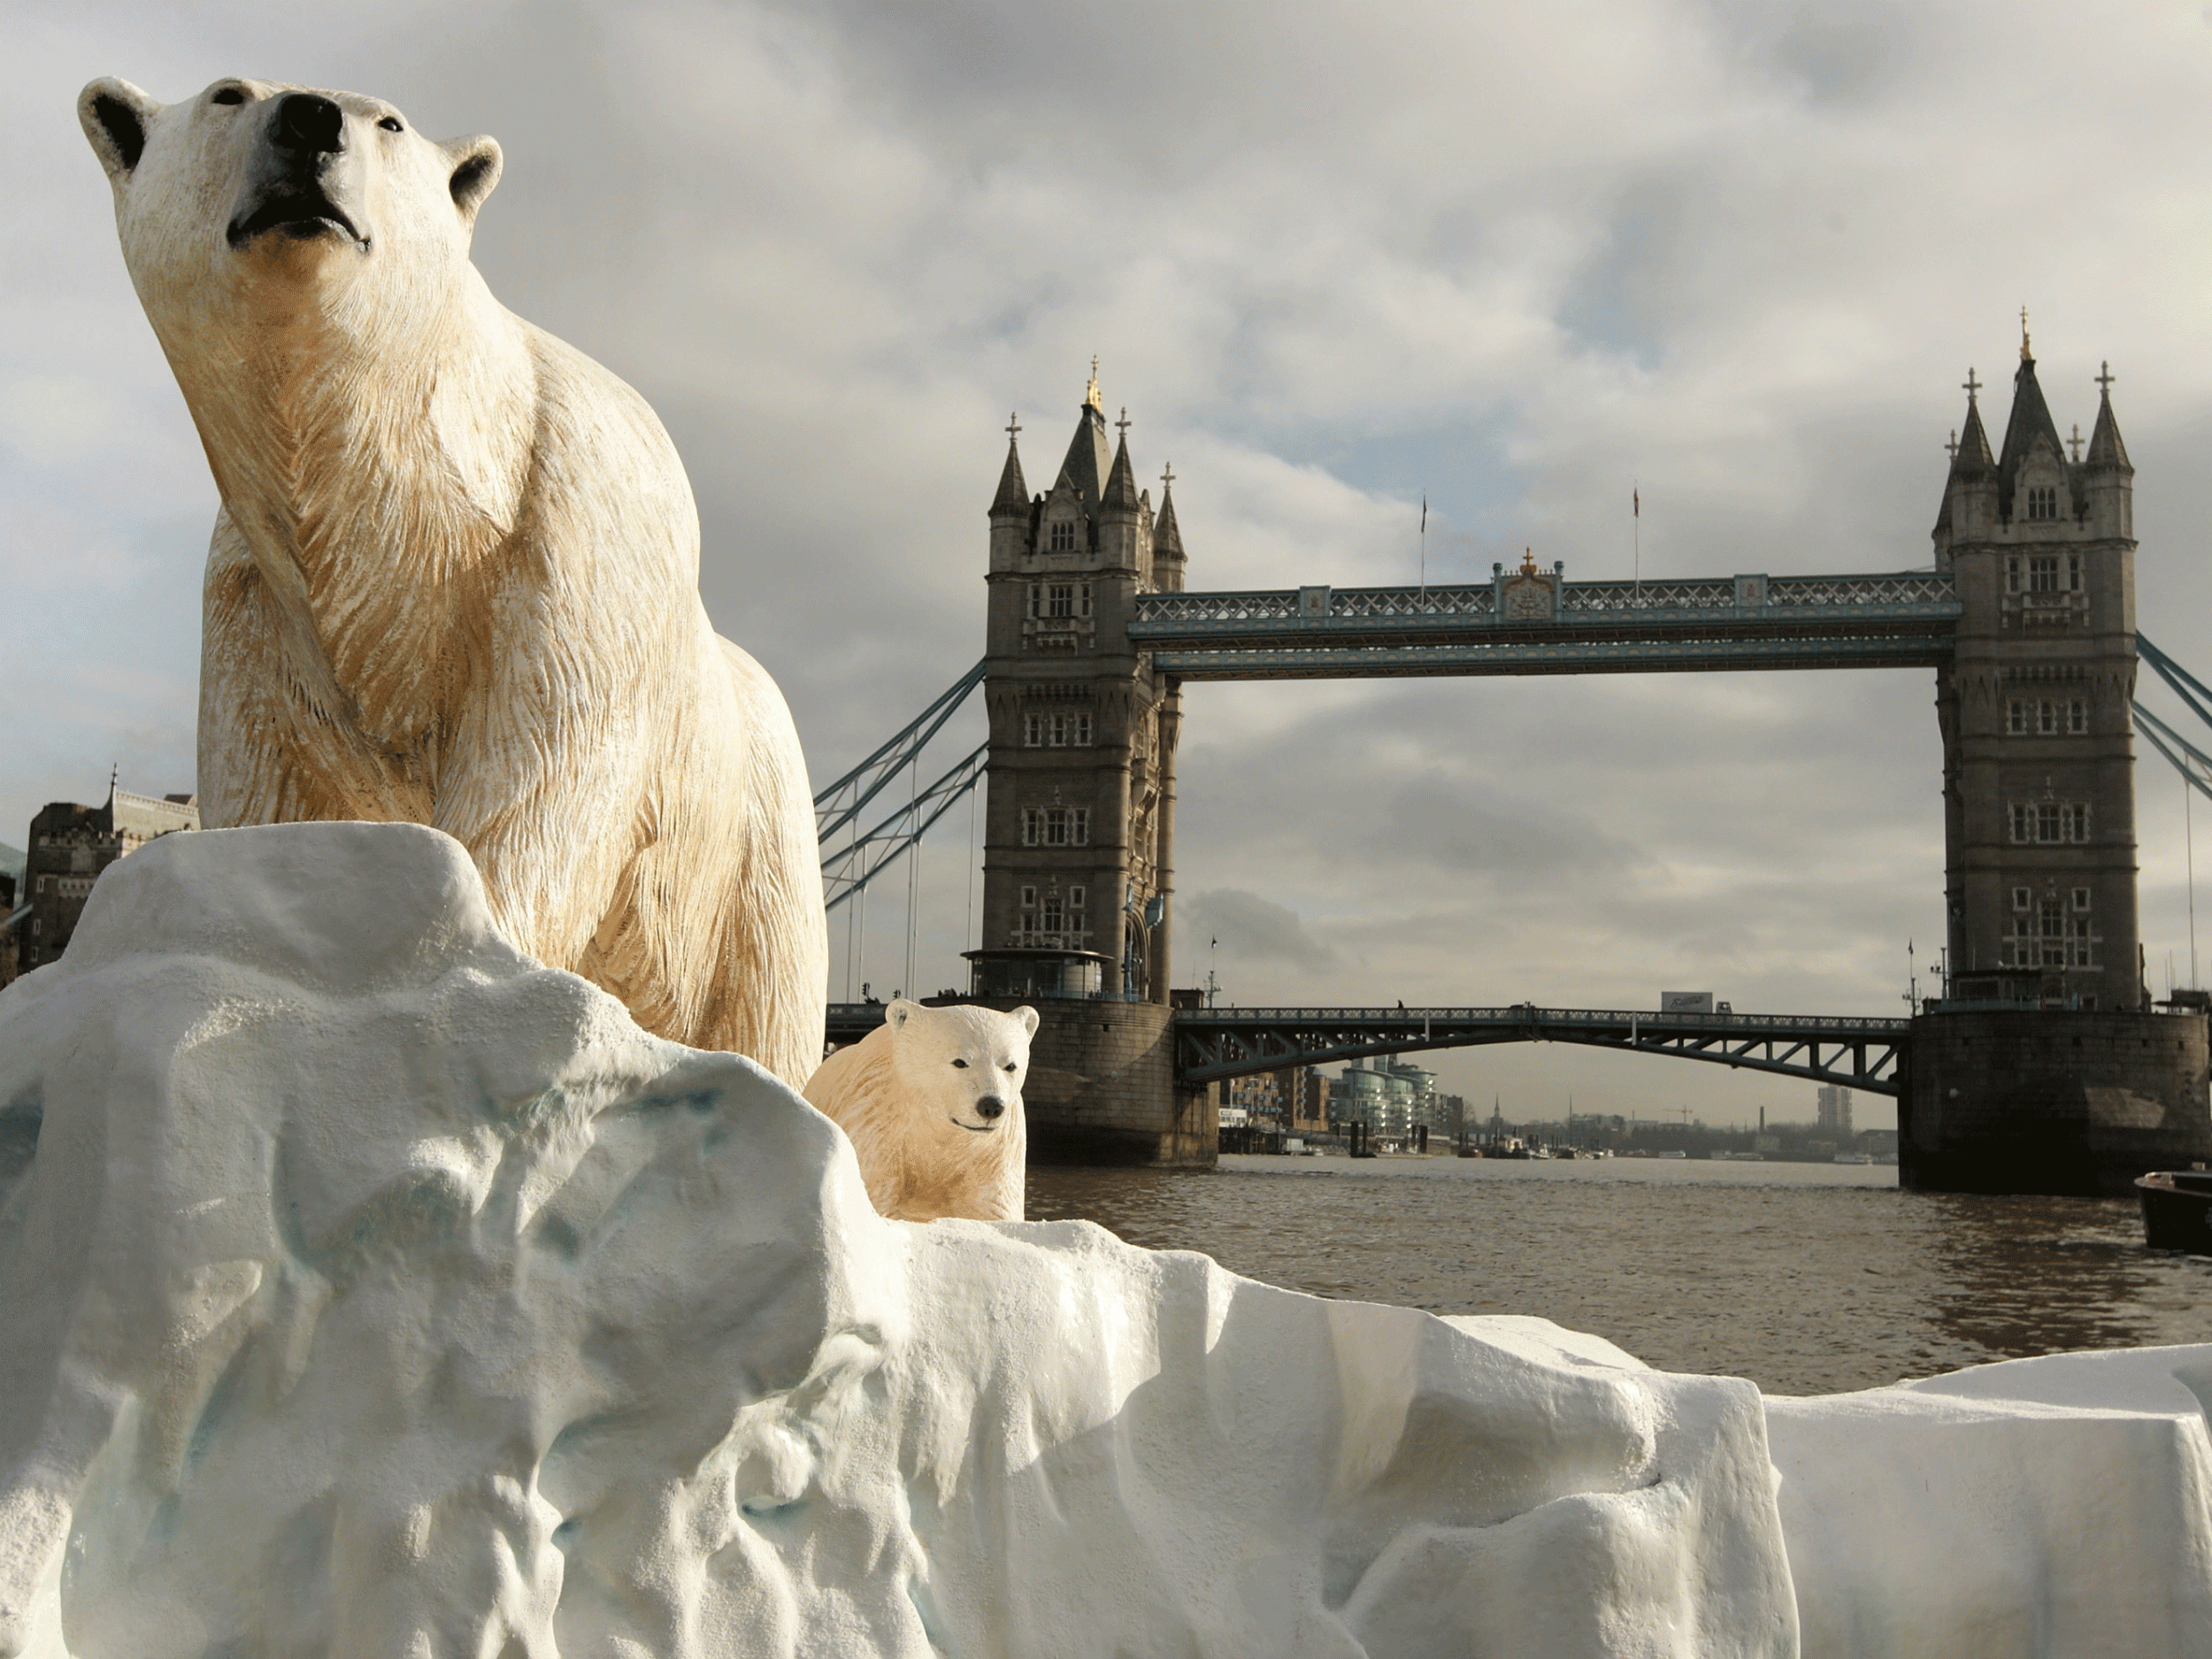 A 16 foot high sculpture of a polar bear and cub, afloat on a small iceberg on the River Thames, passes in front of Tower Bridge in London